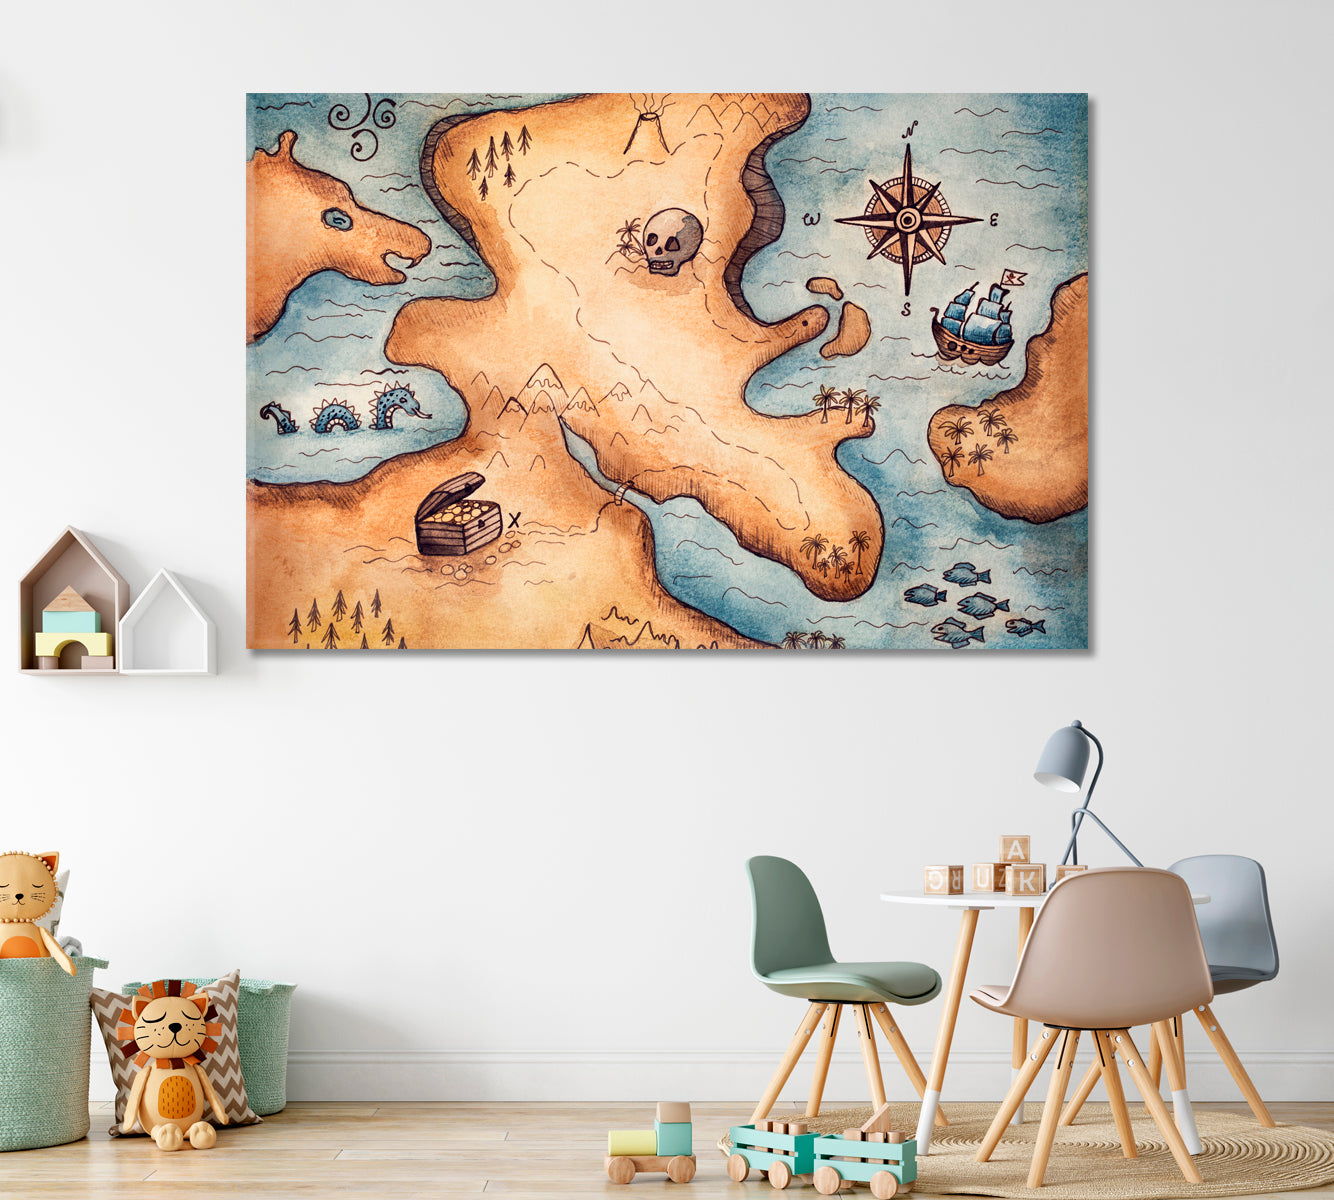 Pirate Map Canvas Print ArtLexy 1 Panel 24"x16" inches 